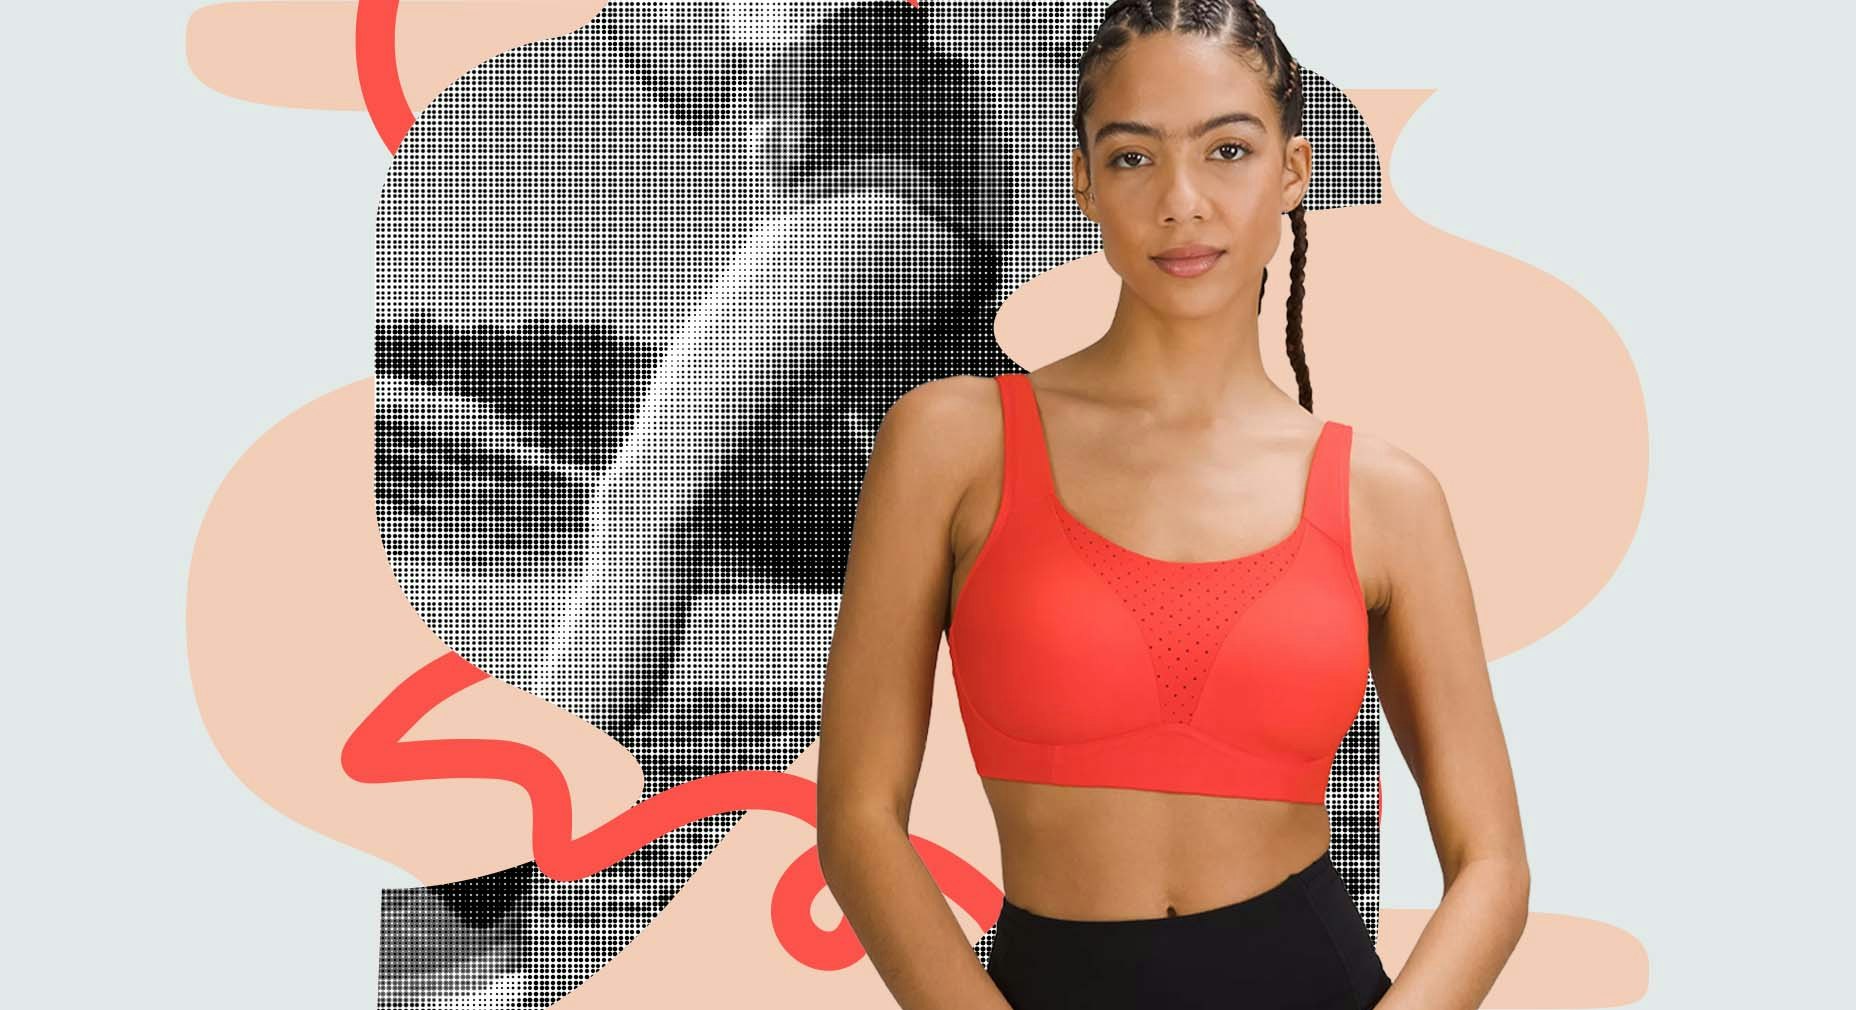 New sports bra review for #runners with big boobs 🤘 #lululemon runtim